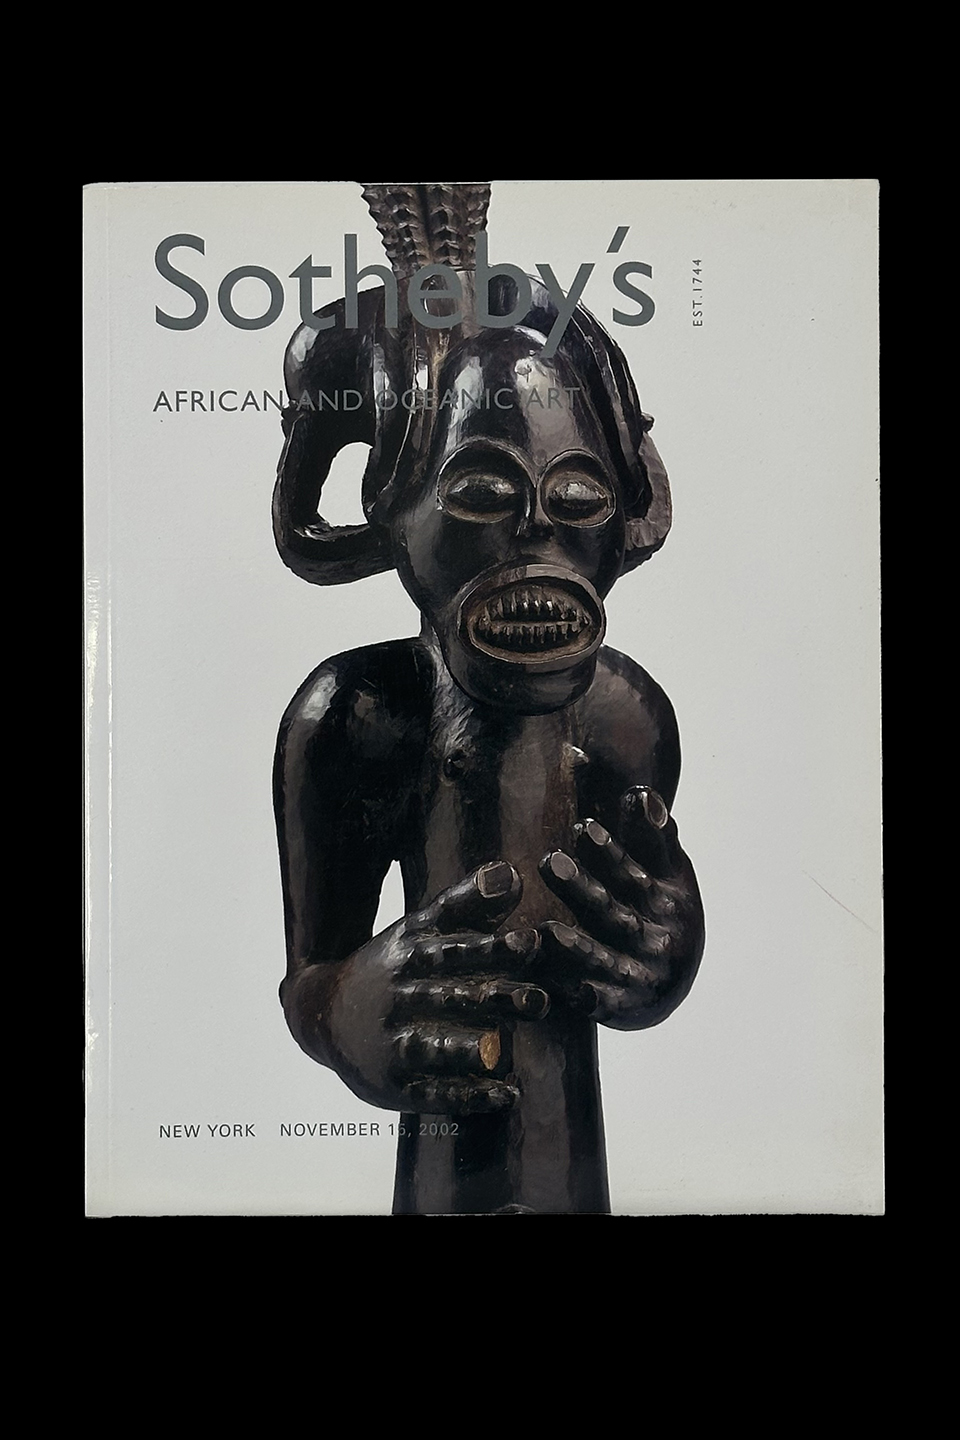 Sotheby's - African and Oceanic Art - New York, November, 2002